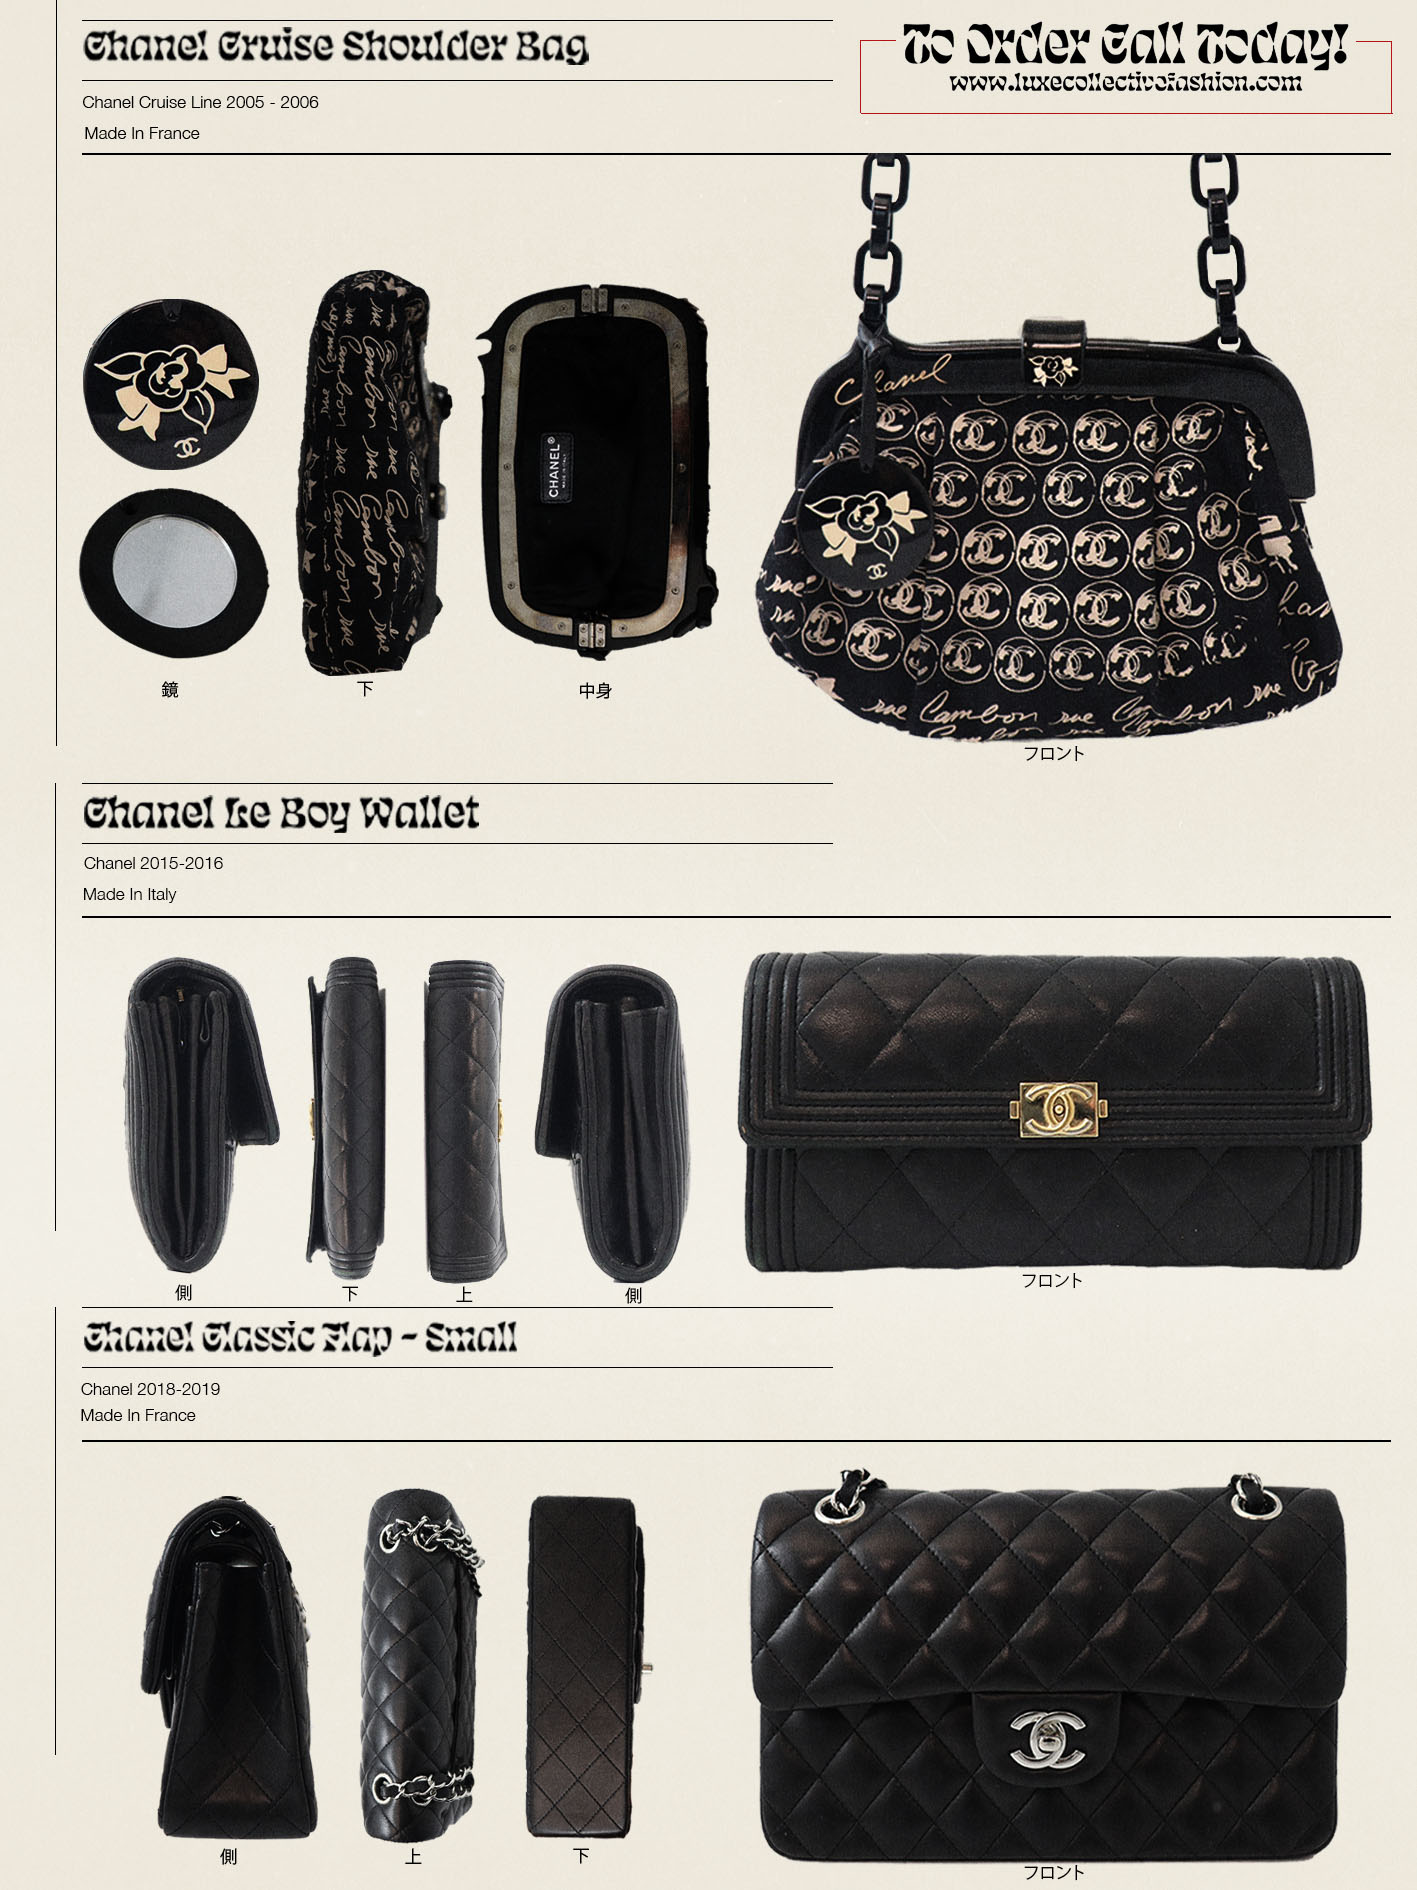 A range of Chanel bags available for purchase on the re-sale site Luxe Collective.